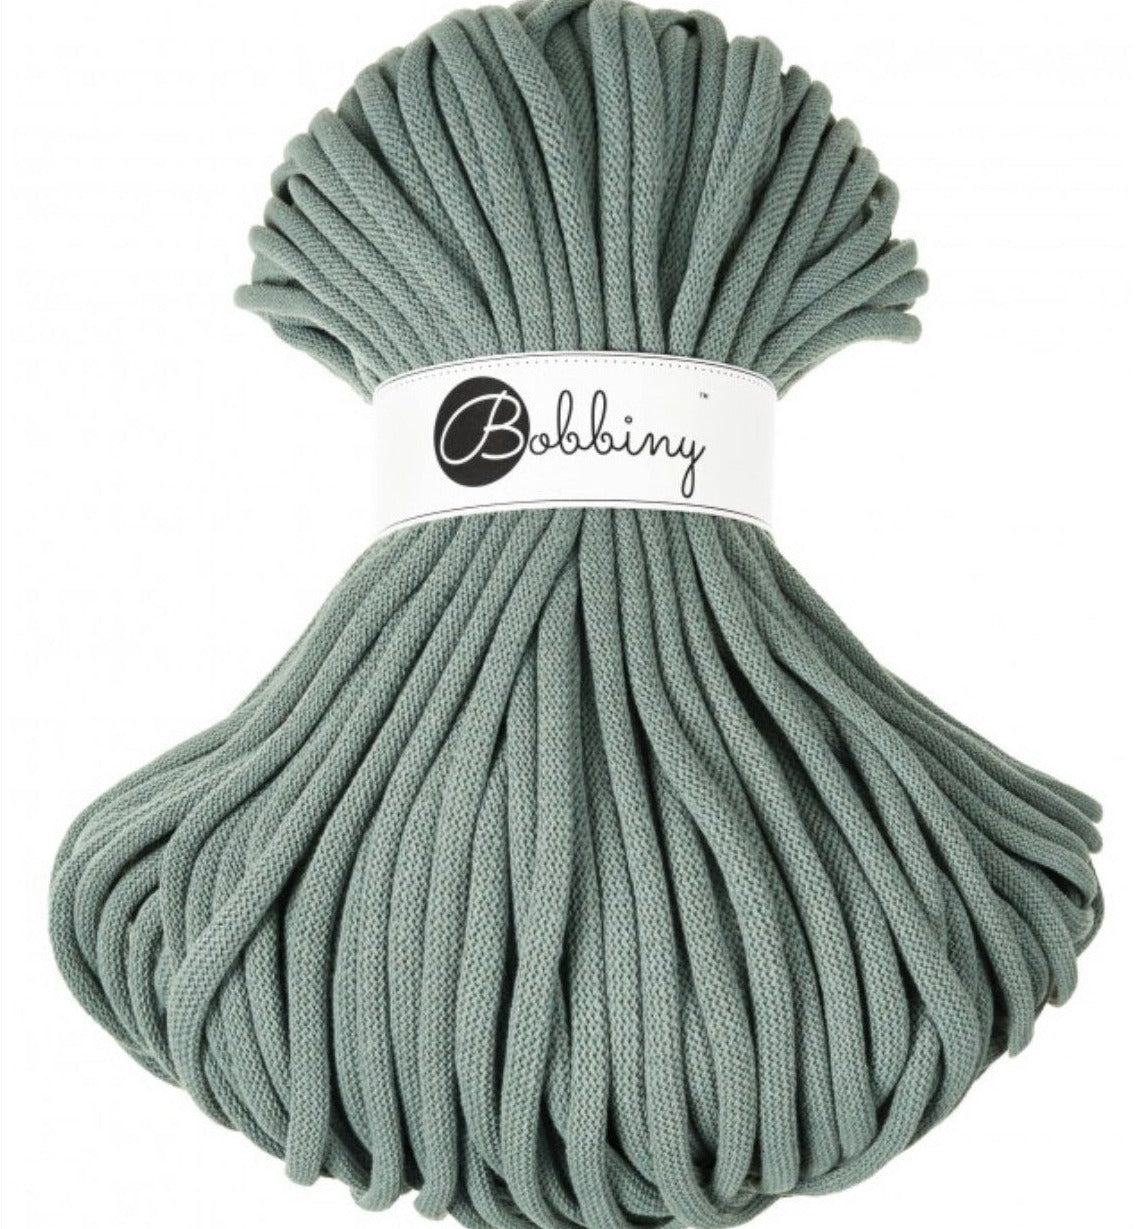 Where can I find Bobbiny Braided Cords Bobbiny Jumbo 9mm - 100m Laurel? These gorgeous Bobbiny Ropes are made in Poland from 100% recycled cottons and are non toxic and certified safe for children.  9mm Diameter  Length 100m  Recommended for use with 14-16mm crochet hooks or knitting needles. Perfect for use with Macrame, Crochet or Knitting.